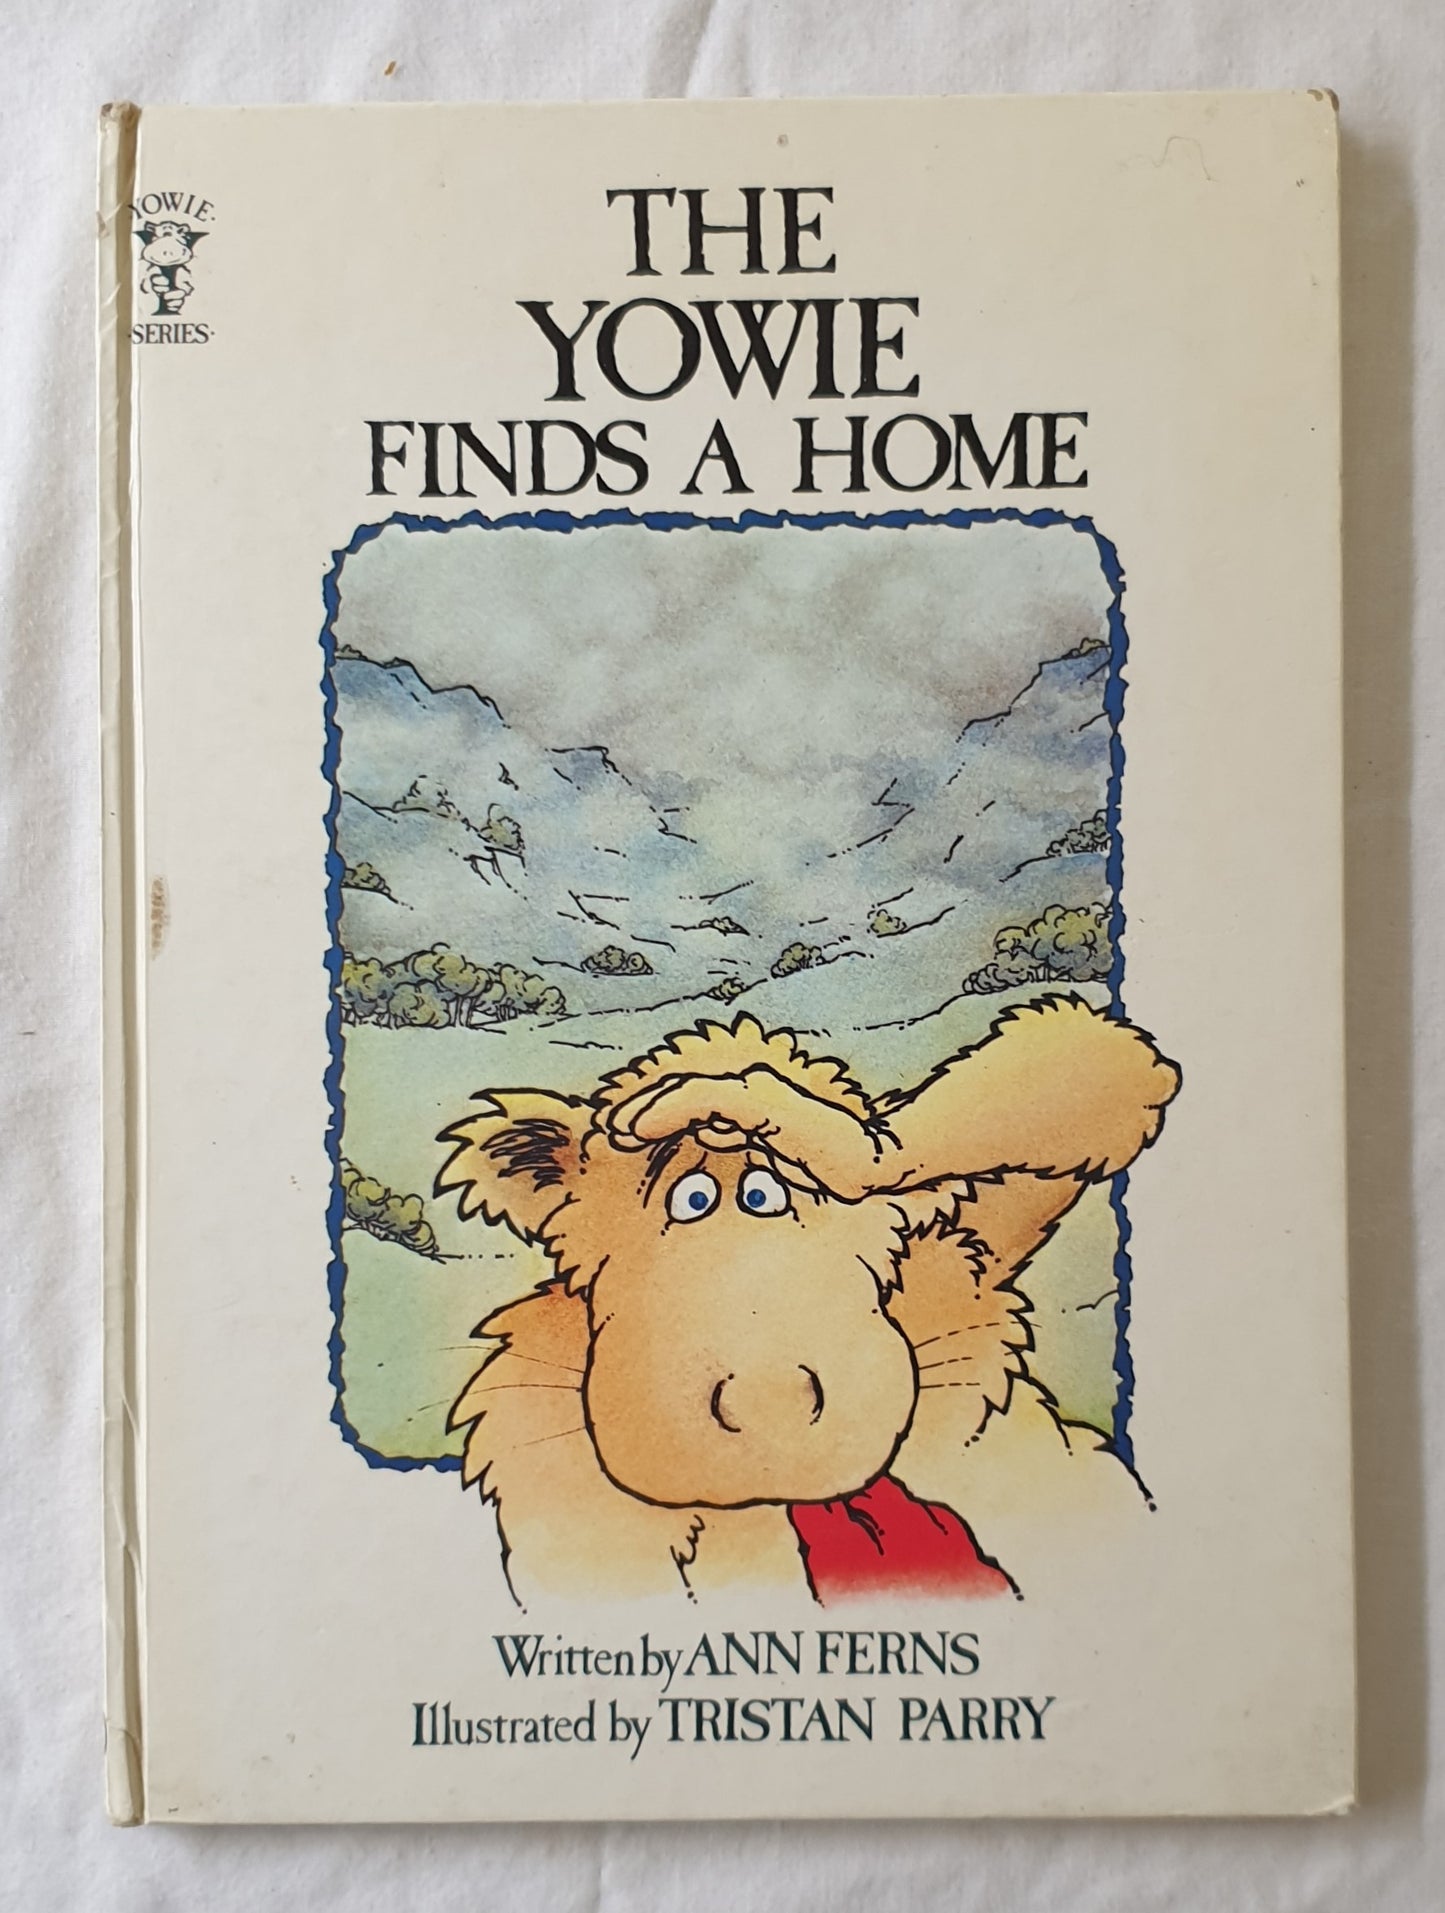 The Yowie Finds A Home by Ann Ferns